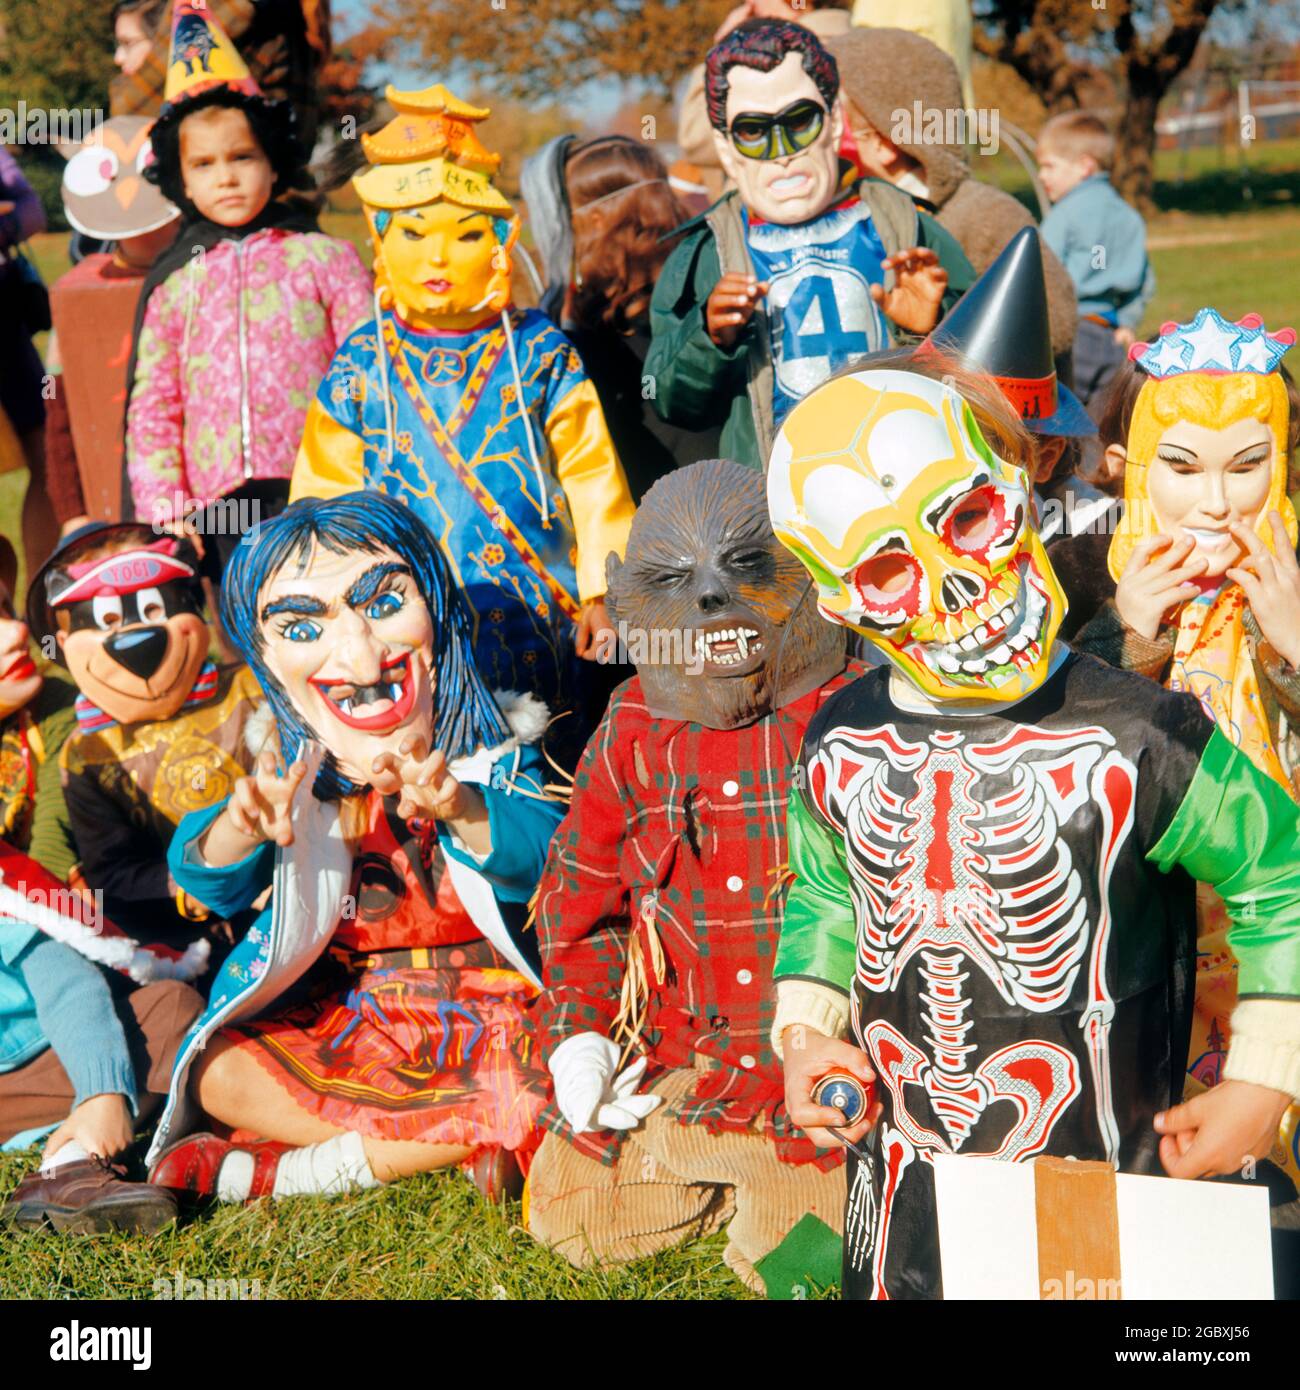 1970s GROUP OF NEIGHBORHOOD KIDS BOYS AND GIRLS IN HALLOWEEN COSTUMES AND  MASKS - kh3213 HAR001 HARS WITCH NORTH AMERICA EYE CONTACT NORTH AMERICAN  SCARE NEIGHBORHOOD ADVENTURE AND CHARACTERS EXCITEMENT TRICK OR